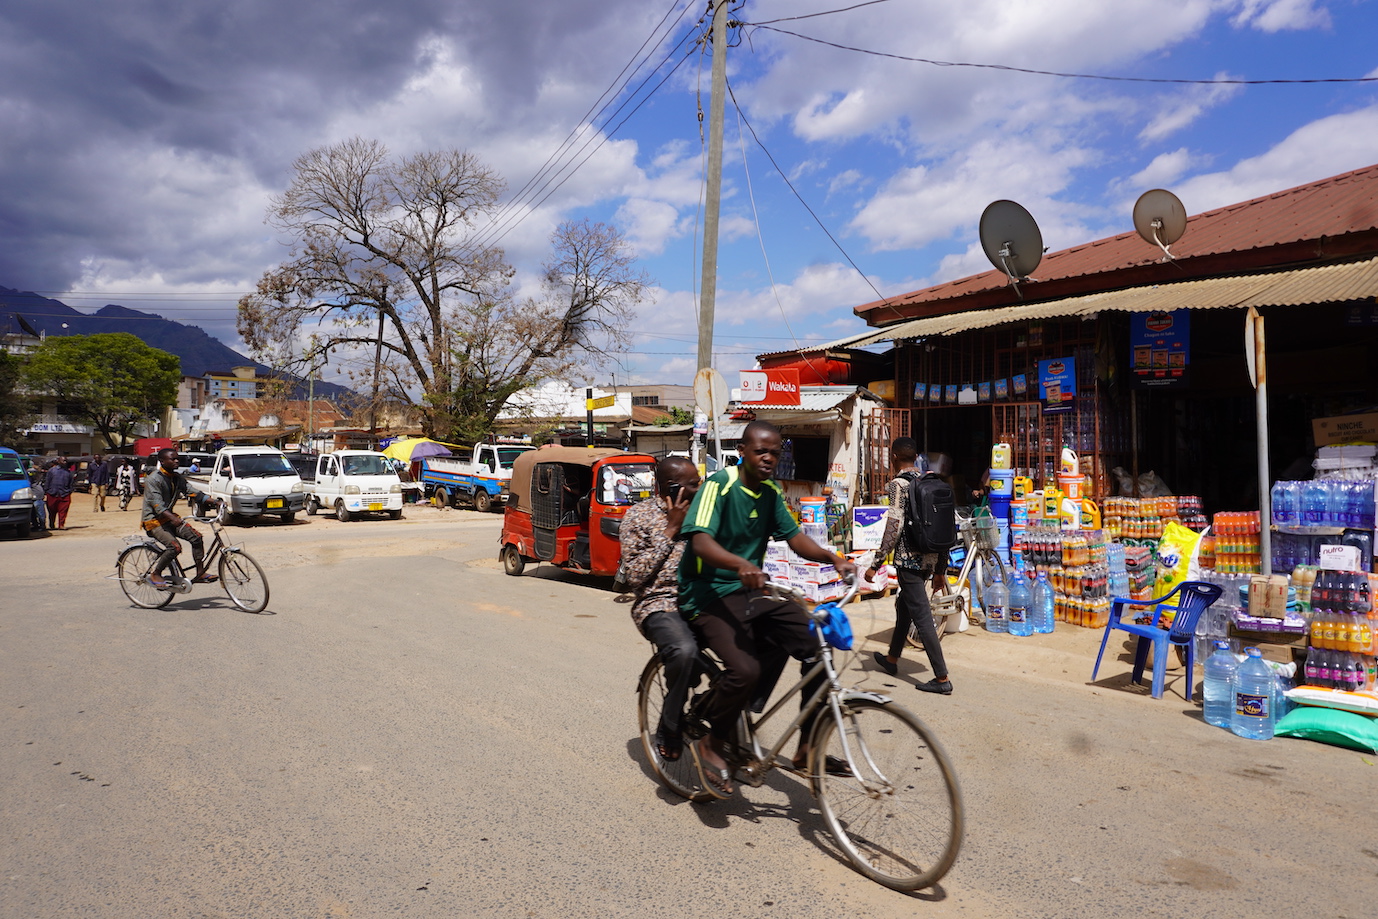 A view of the Morogoro streets. Some shops and a view of a red Tuk Tuk with a shop and some local people biking